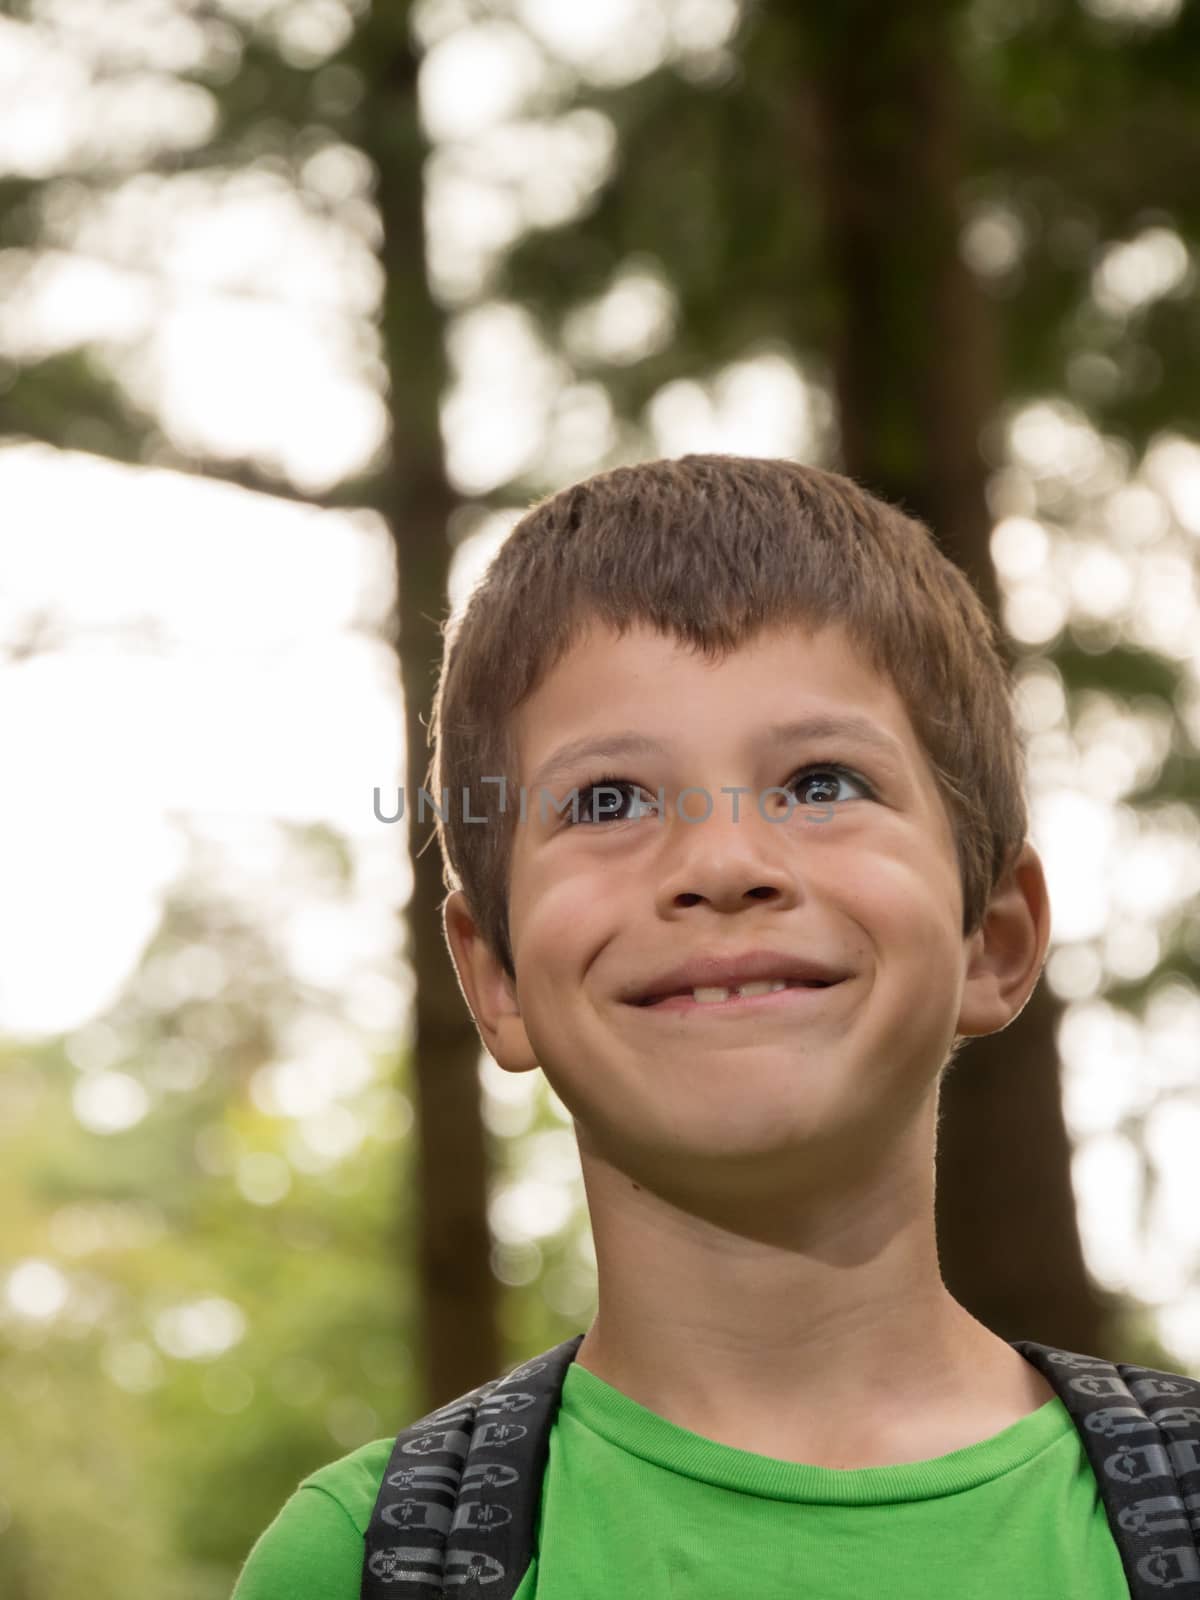 Young child hiking in forest with joyful expression on his face.